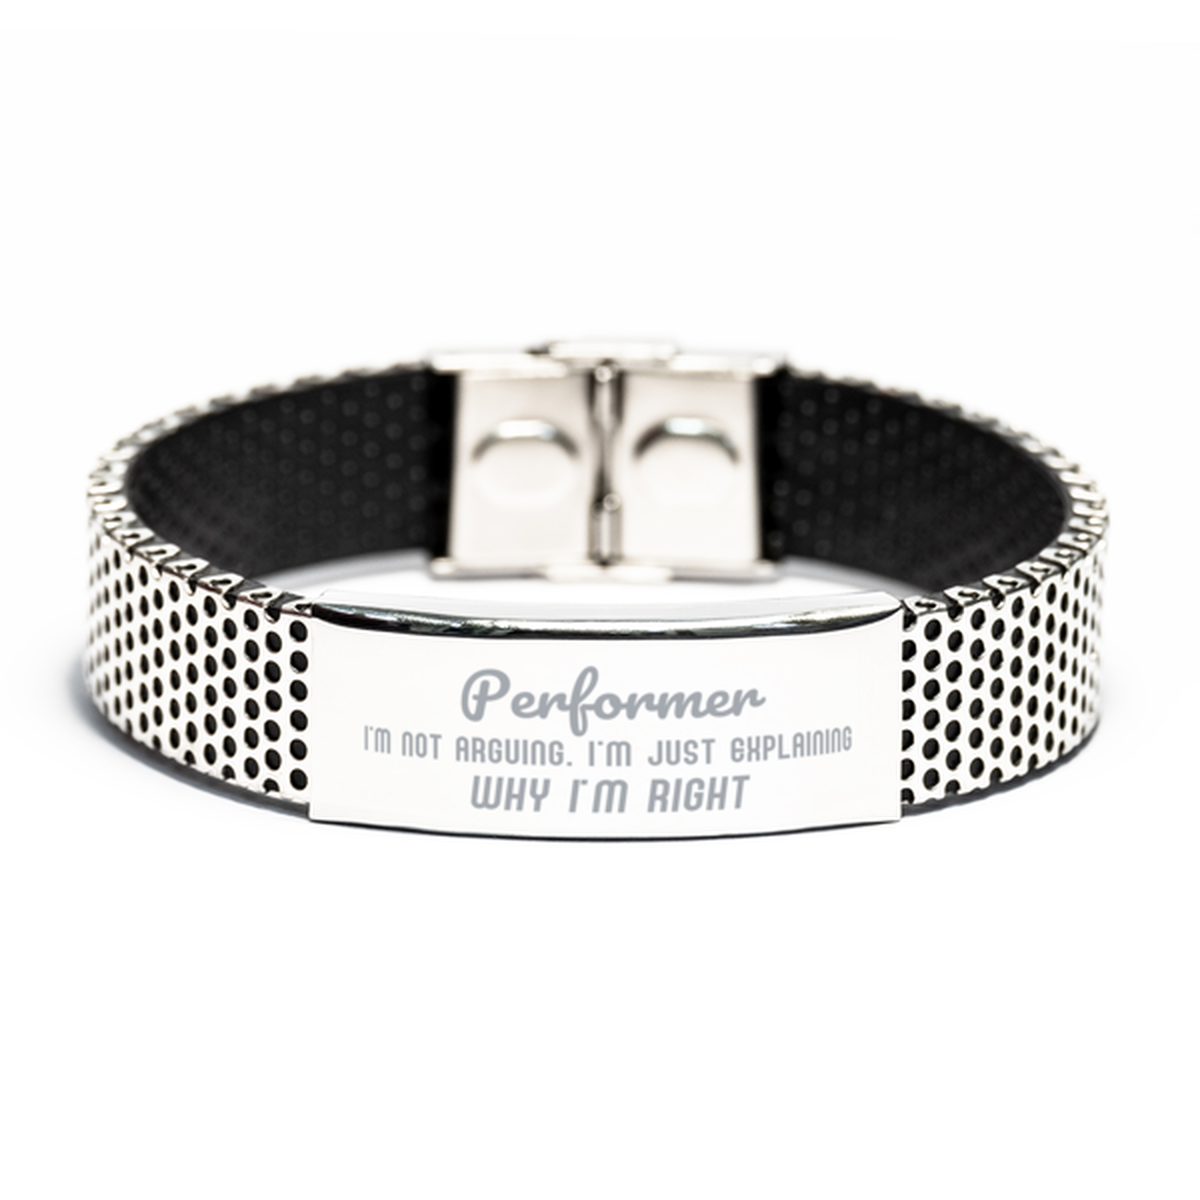 Performer I'm not Arguing. I'm Just Explaining Why I'm RIGHT Stainless Steel Bracelet, Funny Saying Quote Performer Gifts For Performer Graduation Birthday Christmas Gifts for Men Women Coworker